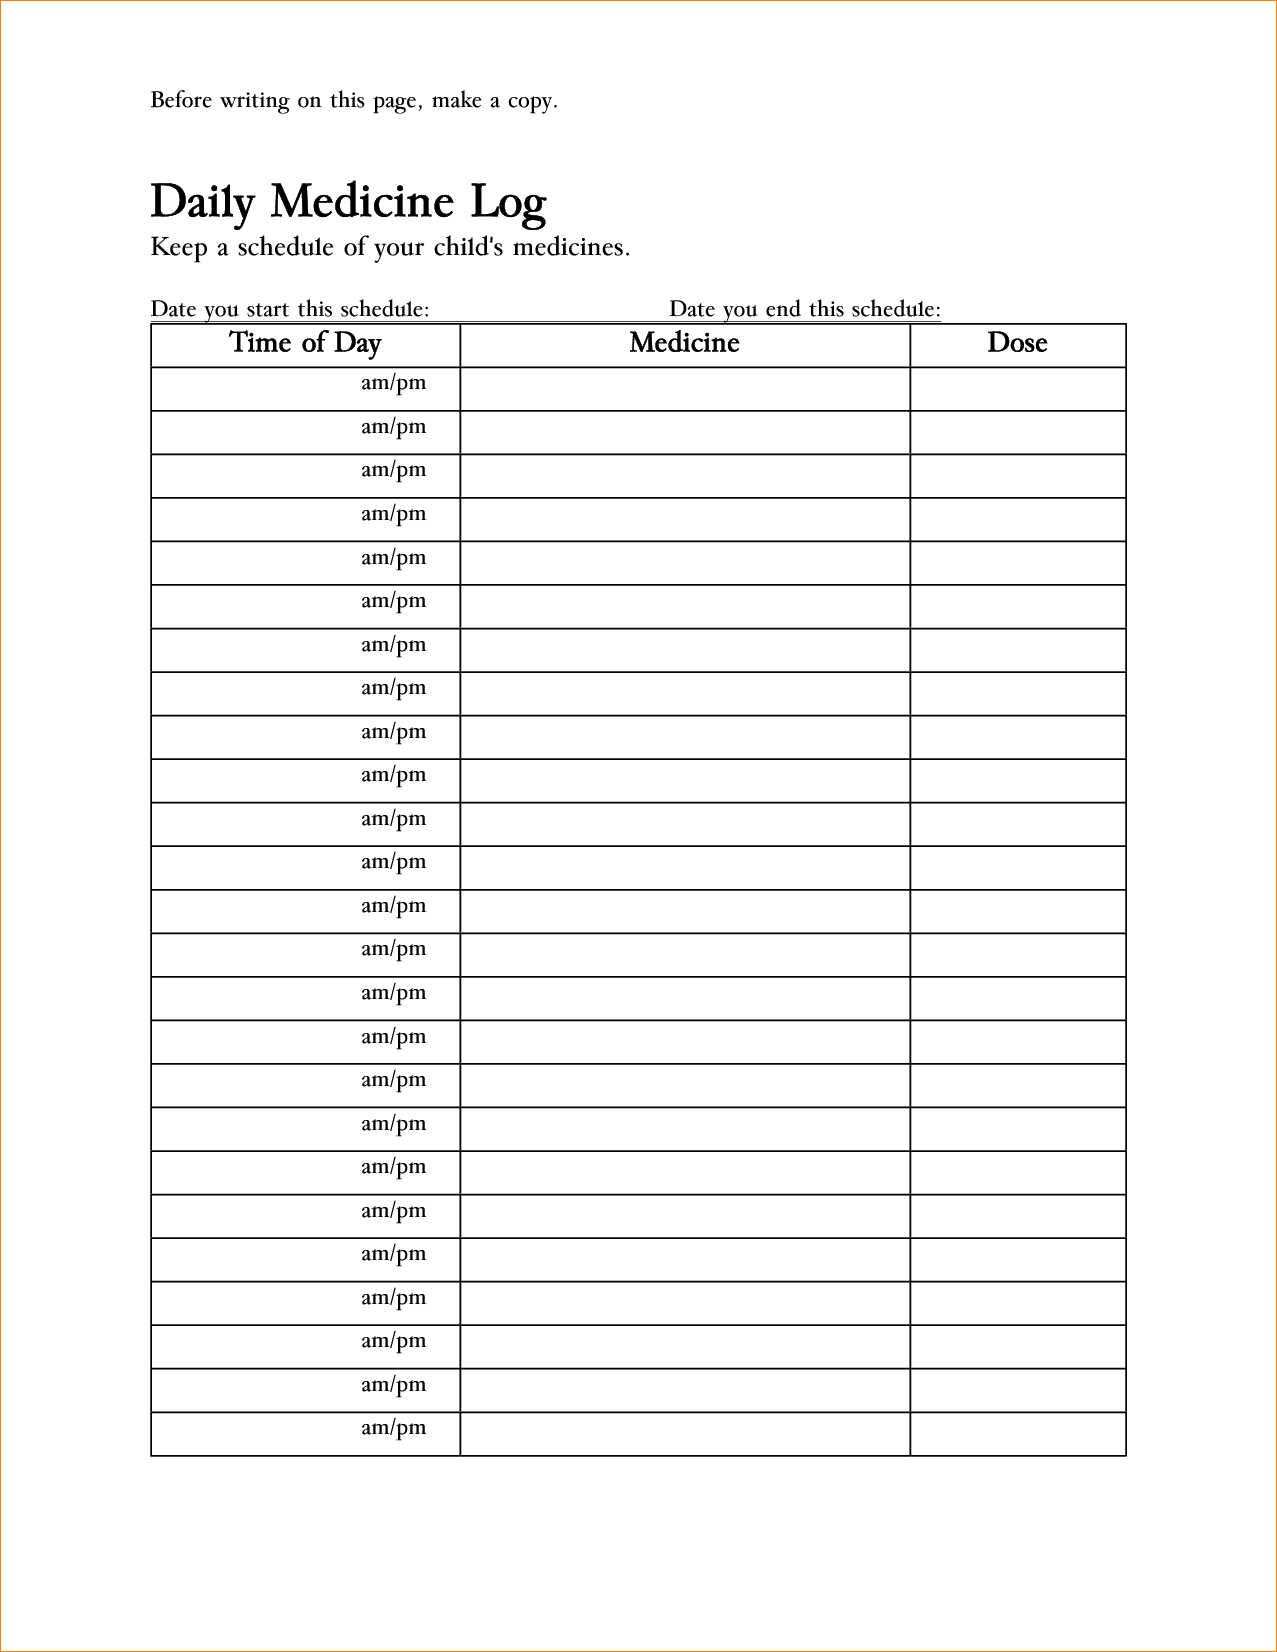 Free Medication Administration Record Template Excel - Yahoo Image - Free Printable Daily Medication Chart